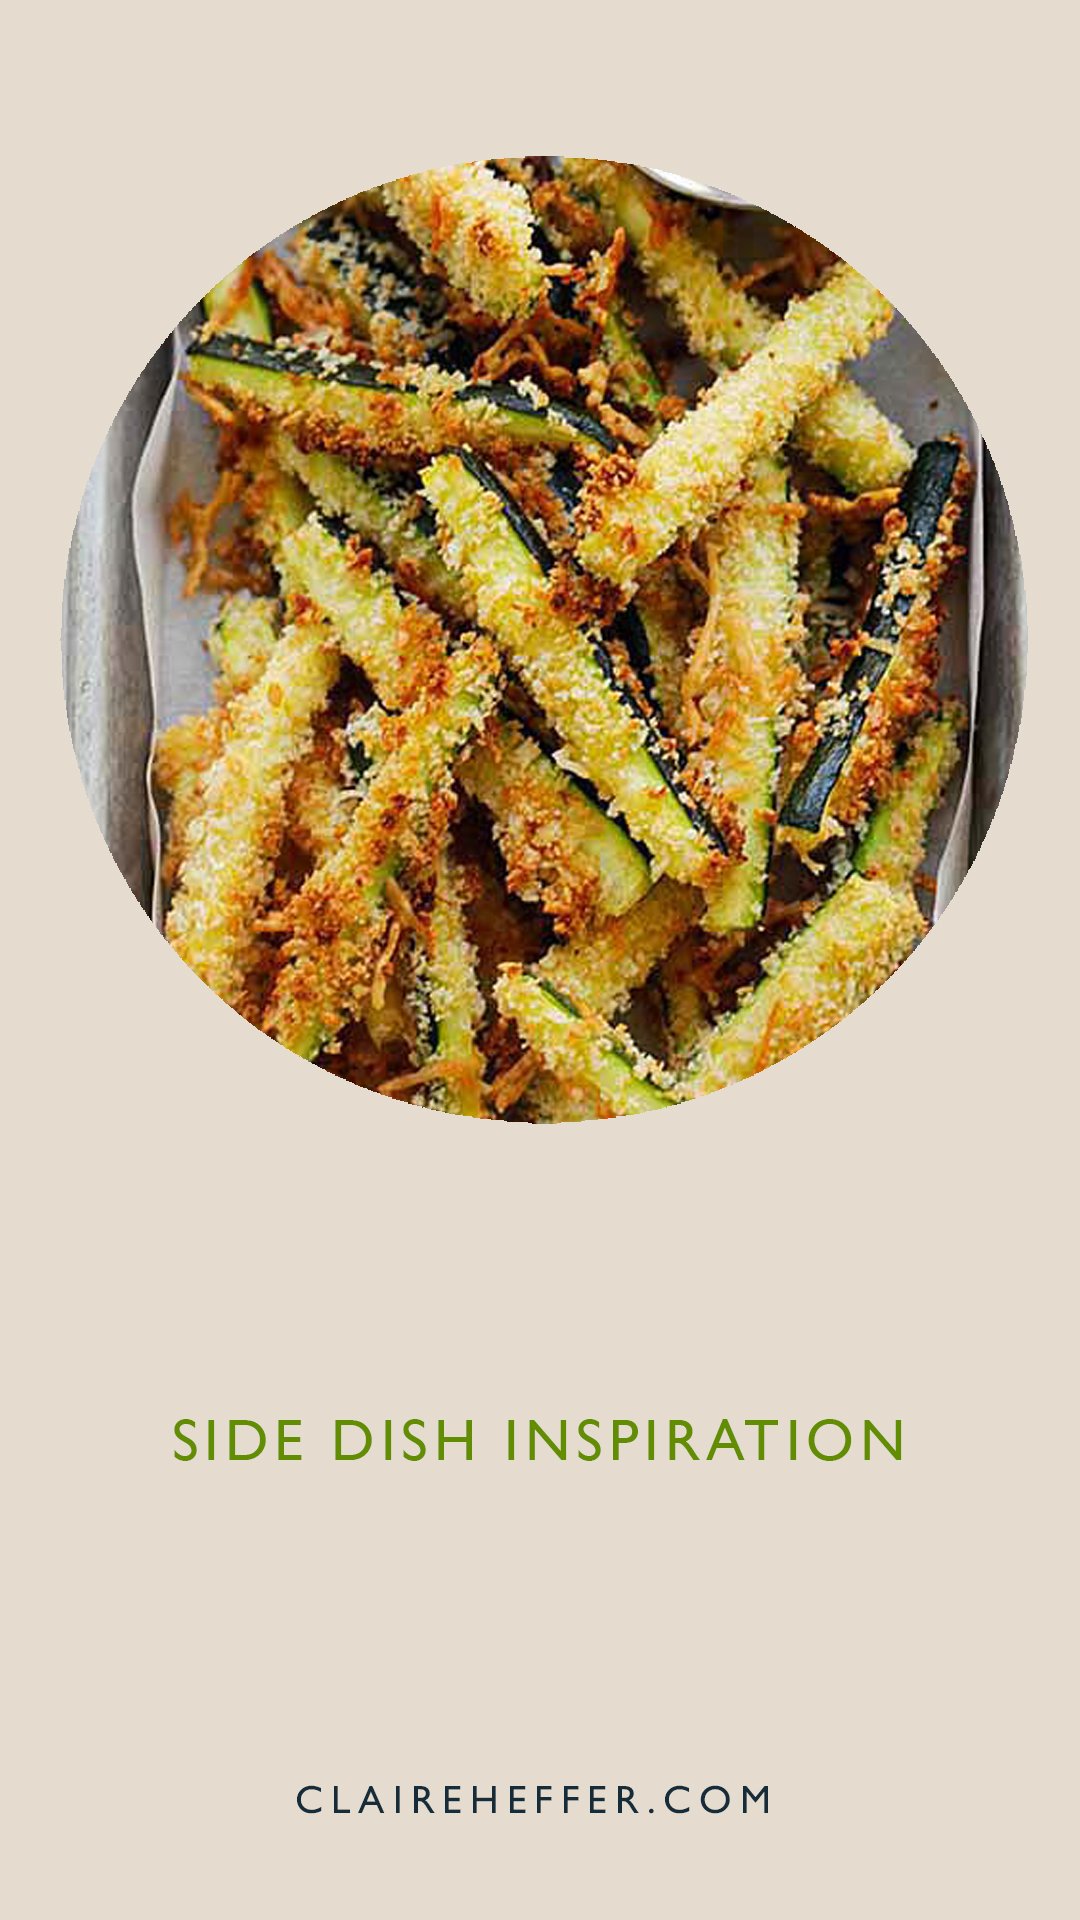 Focus On: Side Dishes, Focus On, Side Dishes, Quick Healthy Side Dishes, Side Dishes To Inspire Your Next Meal, Healthy Side Dishes, Side Dish Inspiration For Your Next Meal, Side Dish